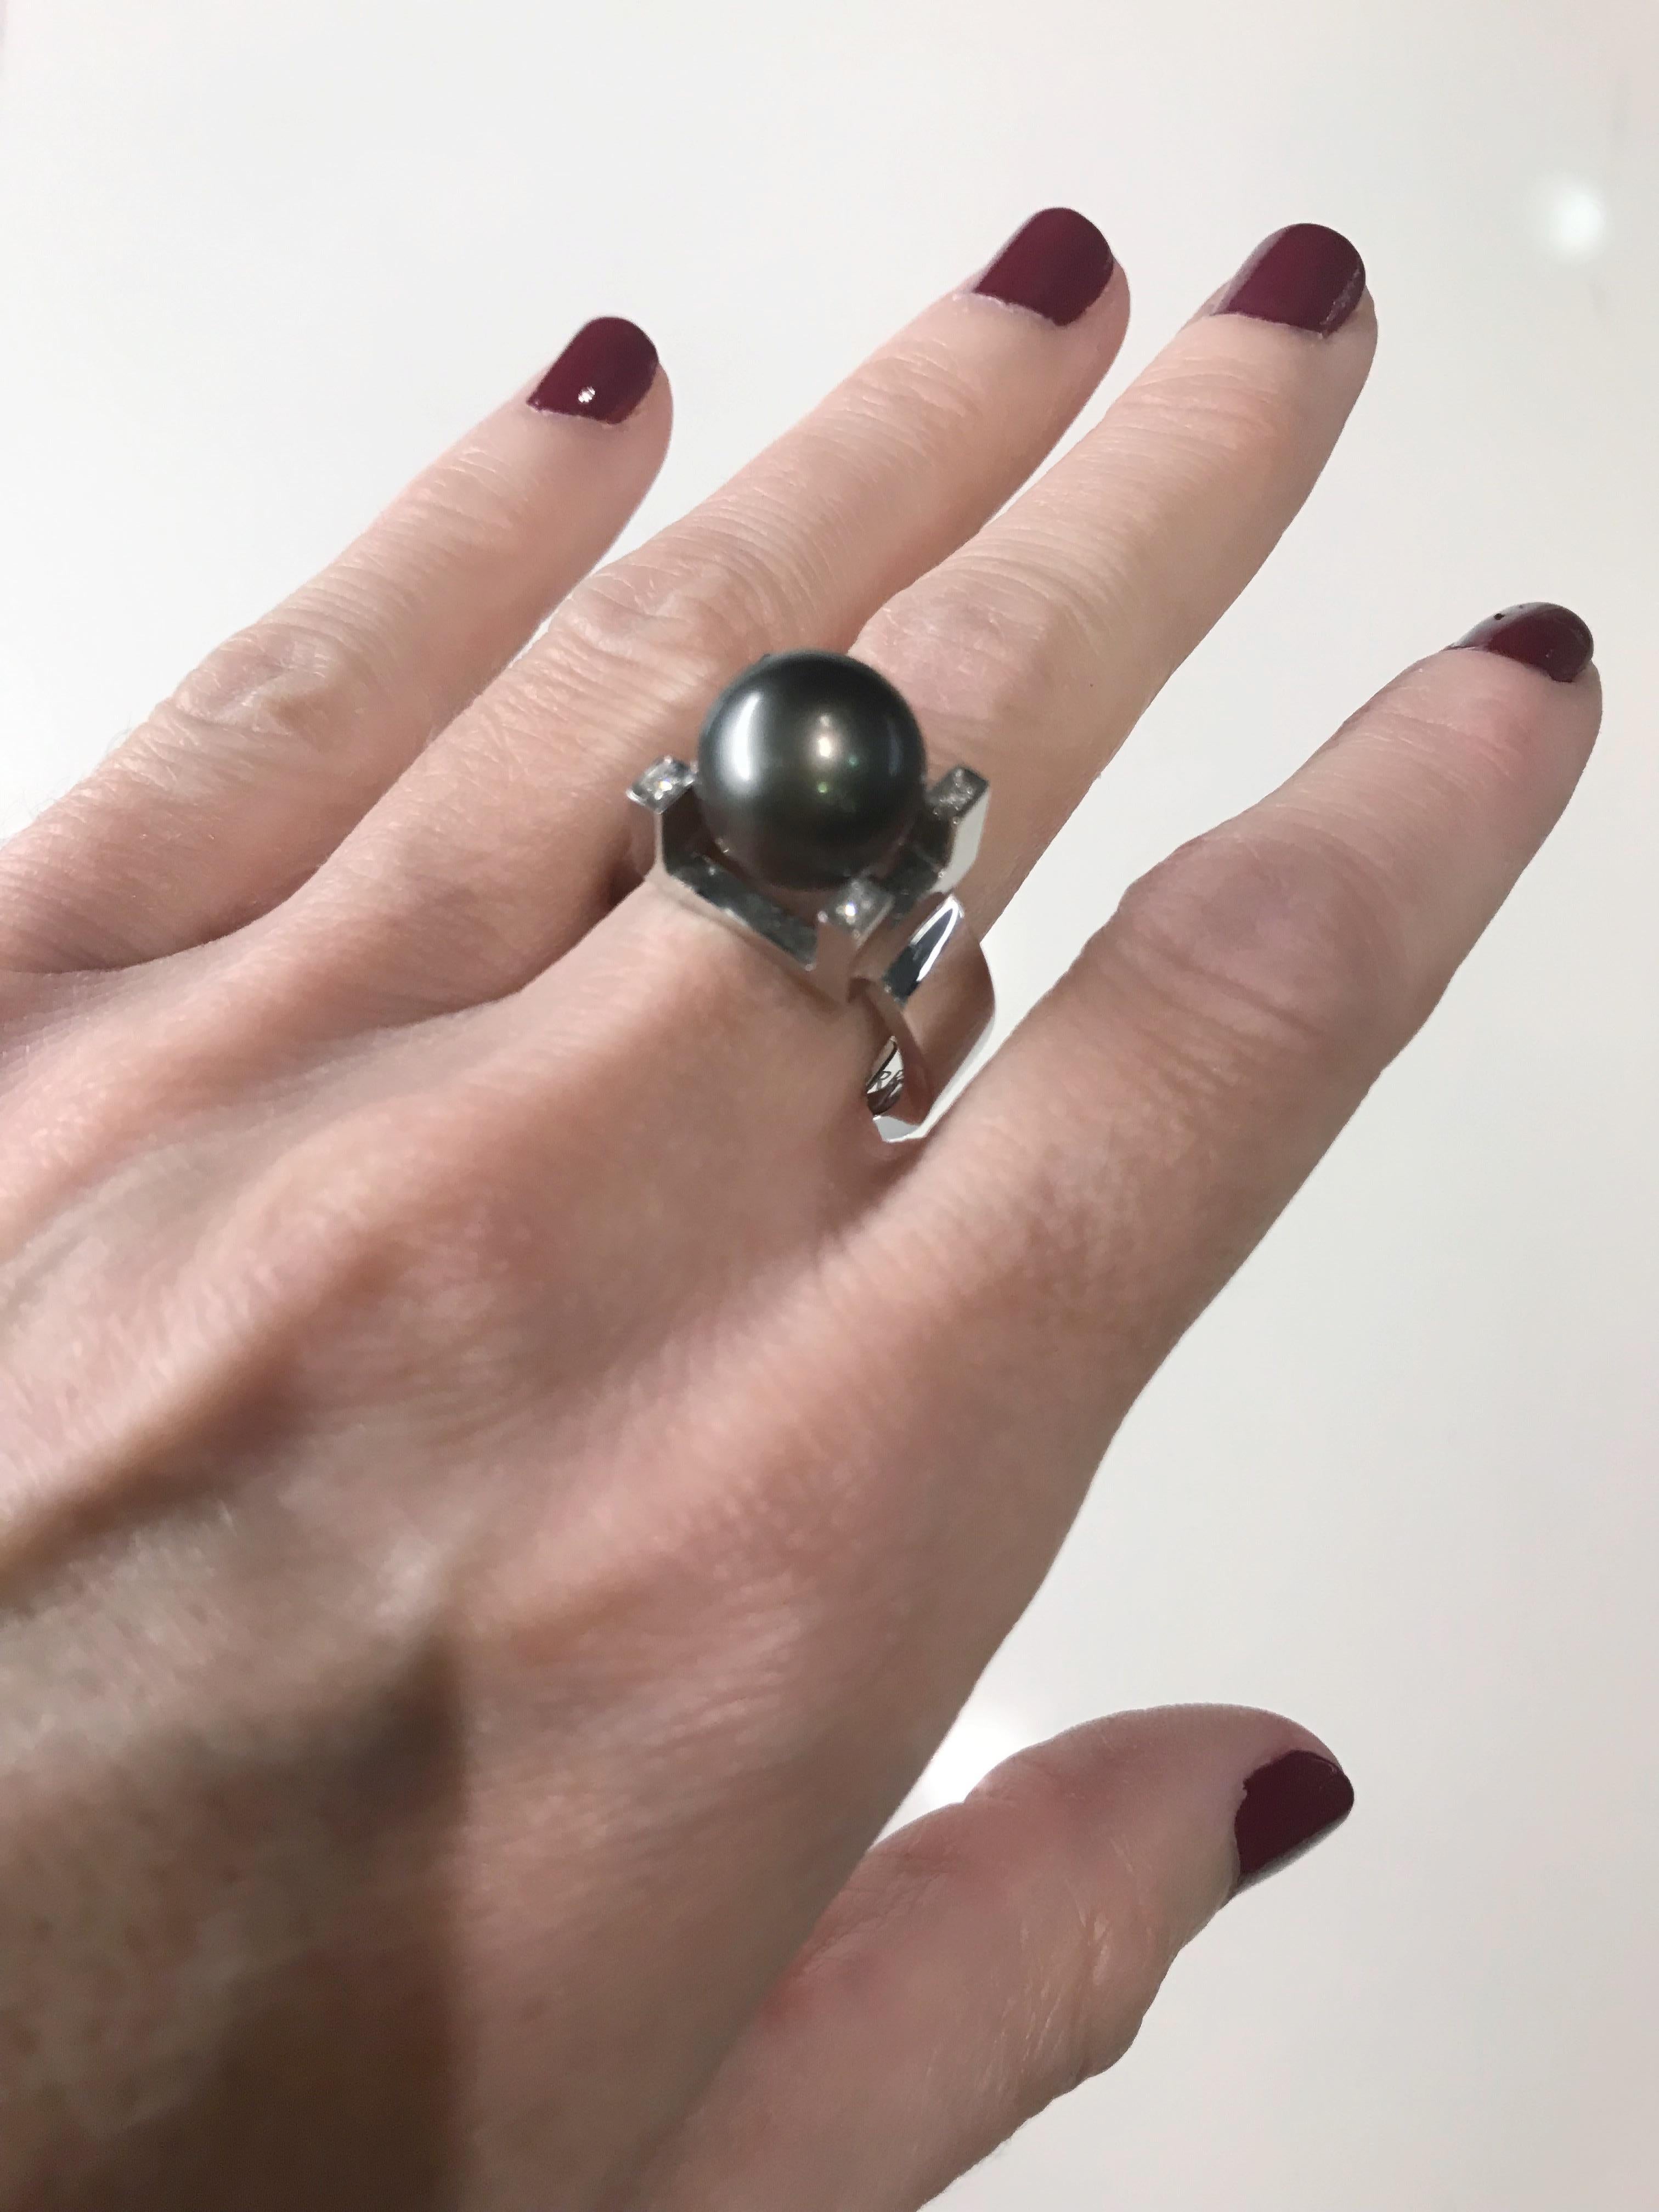 This contemporary white Gold ring adorned with a flawless Tahitian pearl and diamonds makes the perfect daily statement ring. If you want to upgrade your wearable look by adding a design piece this is the right ring. Its white gold architectural